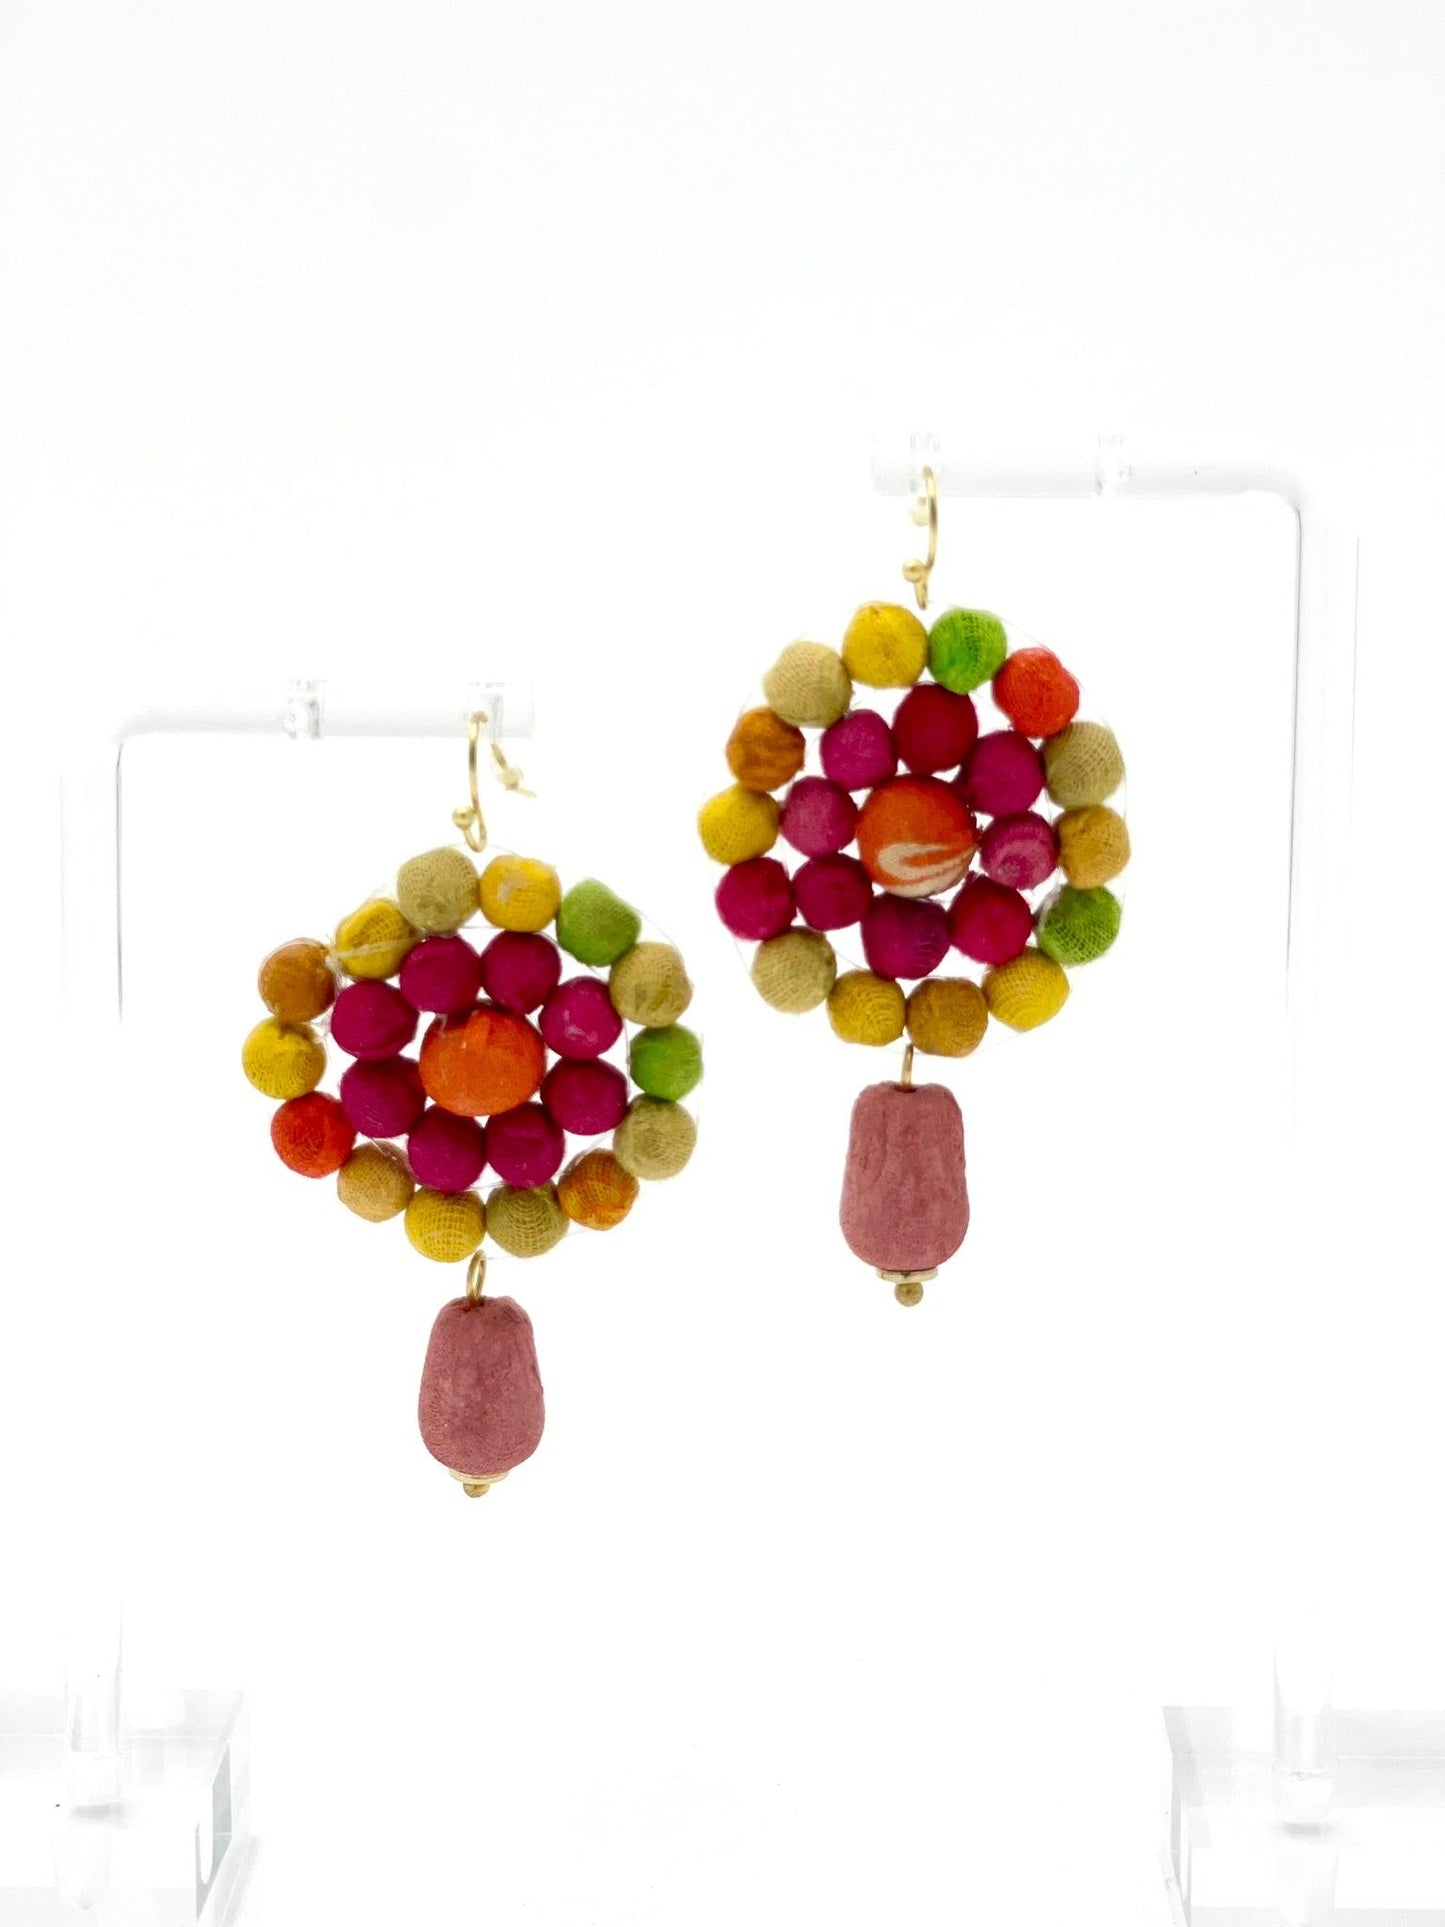 Fair Trade, Daisy Drop Earrings with Upcycled Cotton Fabric - Transcend